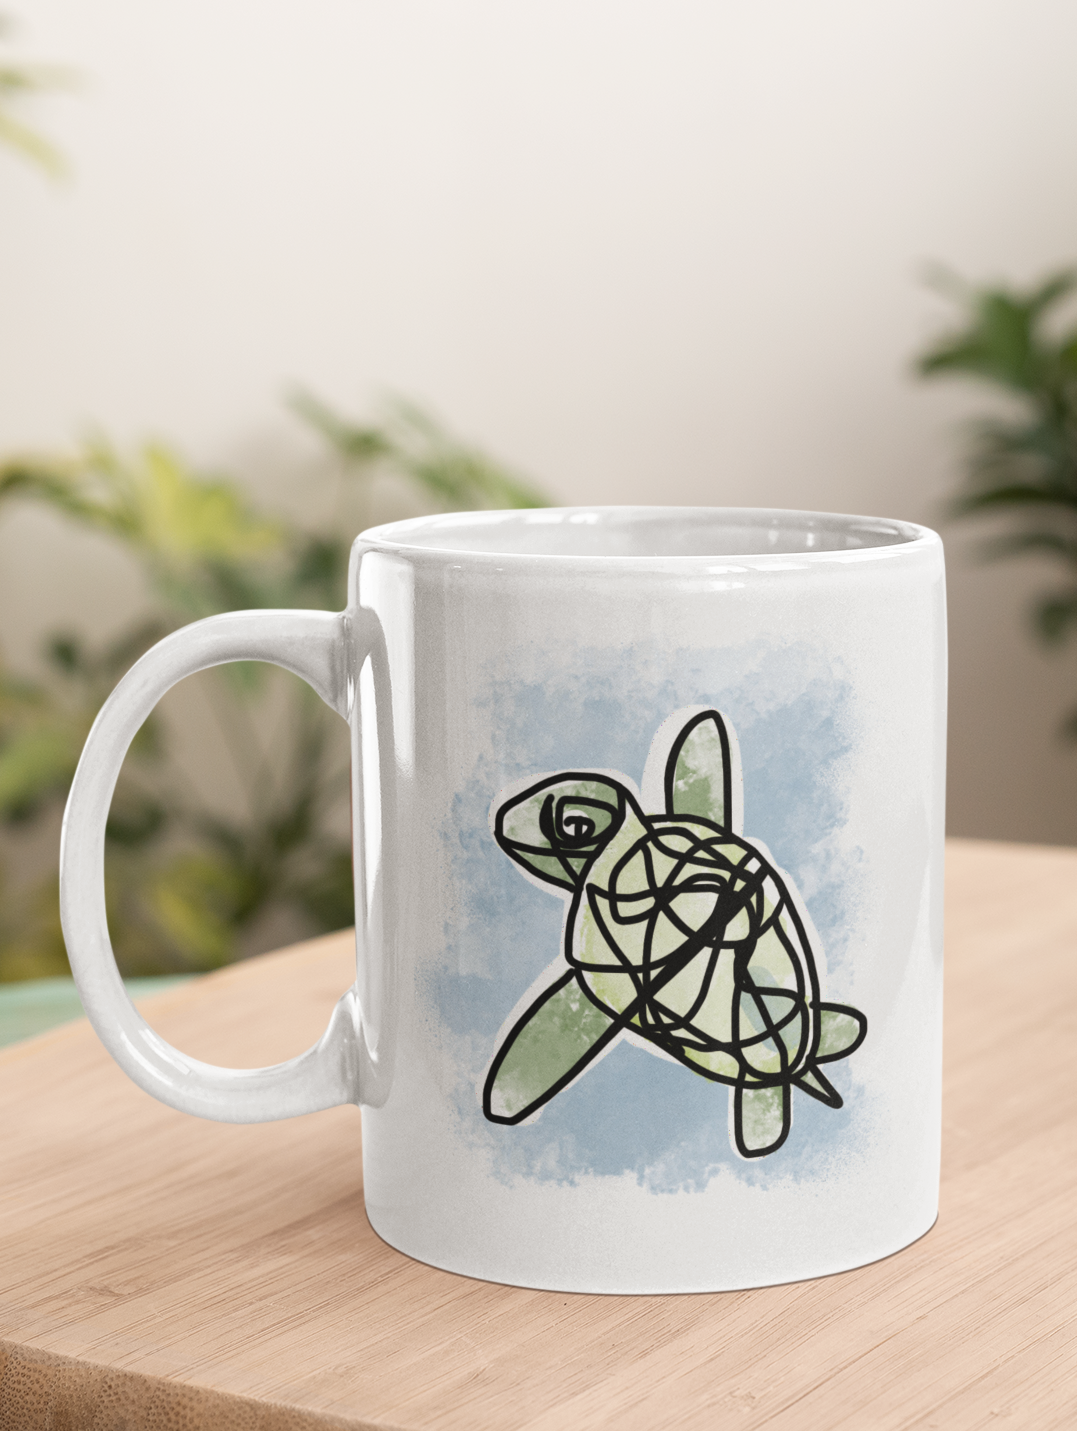 Myrtle the green Sea Turtle illustrated ceramic coffee mug by Hector and Bone